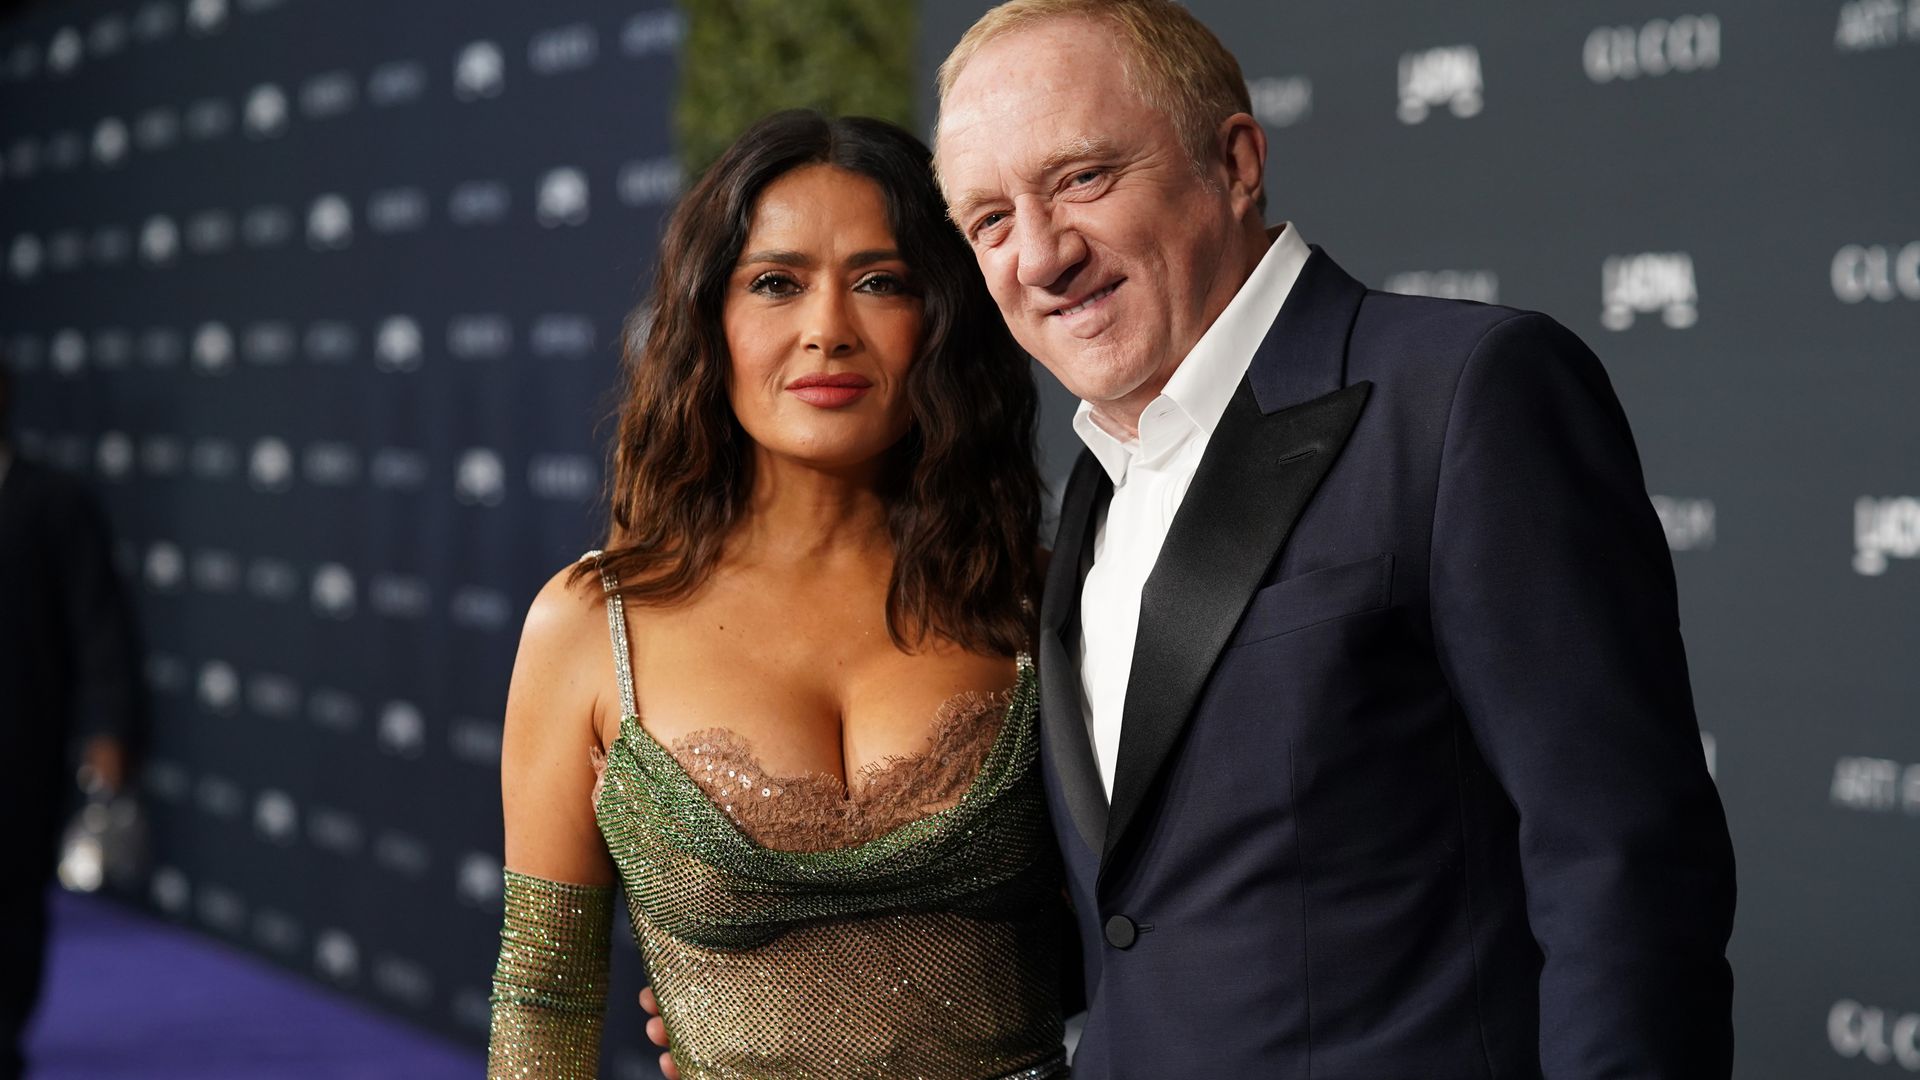 FranÃ§ois-Henri Pinault and Salma Hayek, both wearing Gucci, attend the 2022 LACMA ART+FILM GALA Presented By Gucci at Los Angeles County Museum of Art on November 05, 2022 in Los Angeles, California. (Photo by Presley Ann/Getty Images for LACMA)